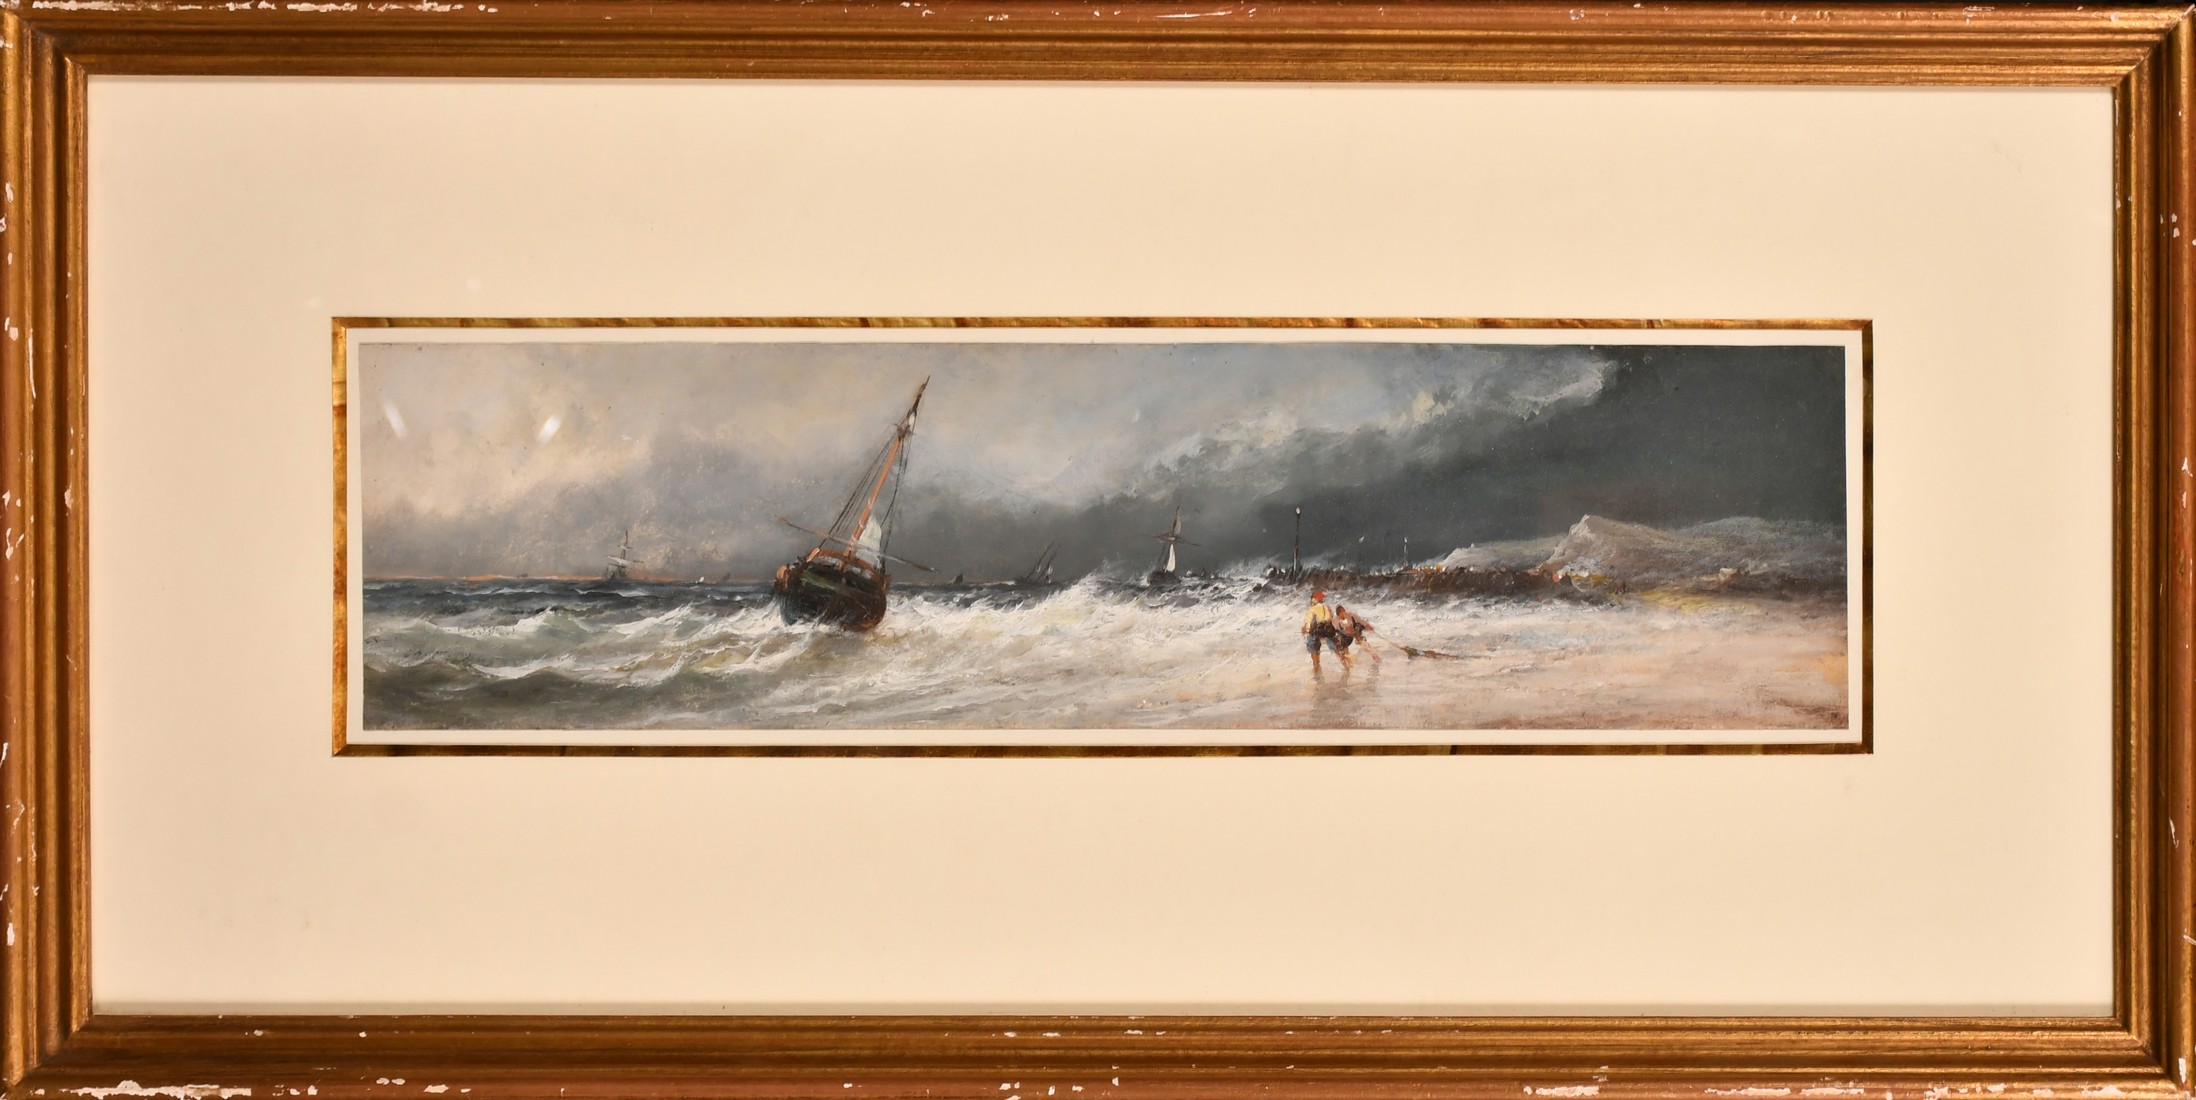 Attributed to William Durrant Ready (1823-1873), figures hauling nets on a beach with boats on rough - Image 2 of 4